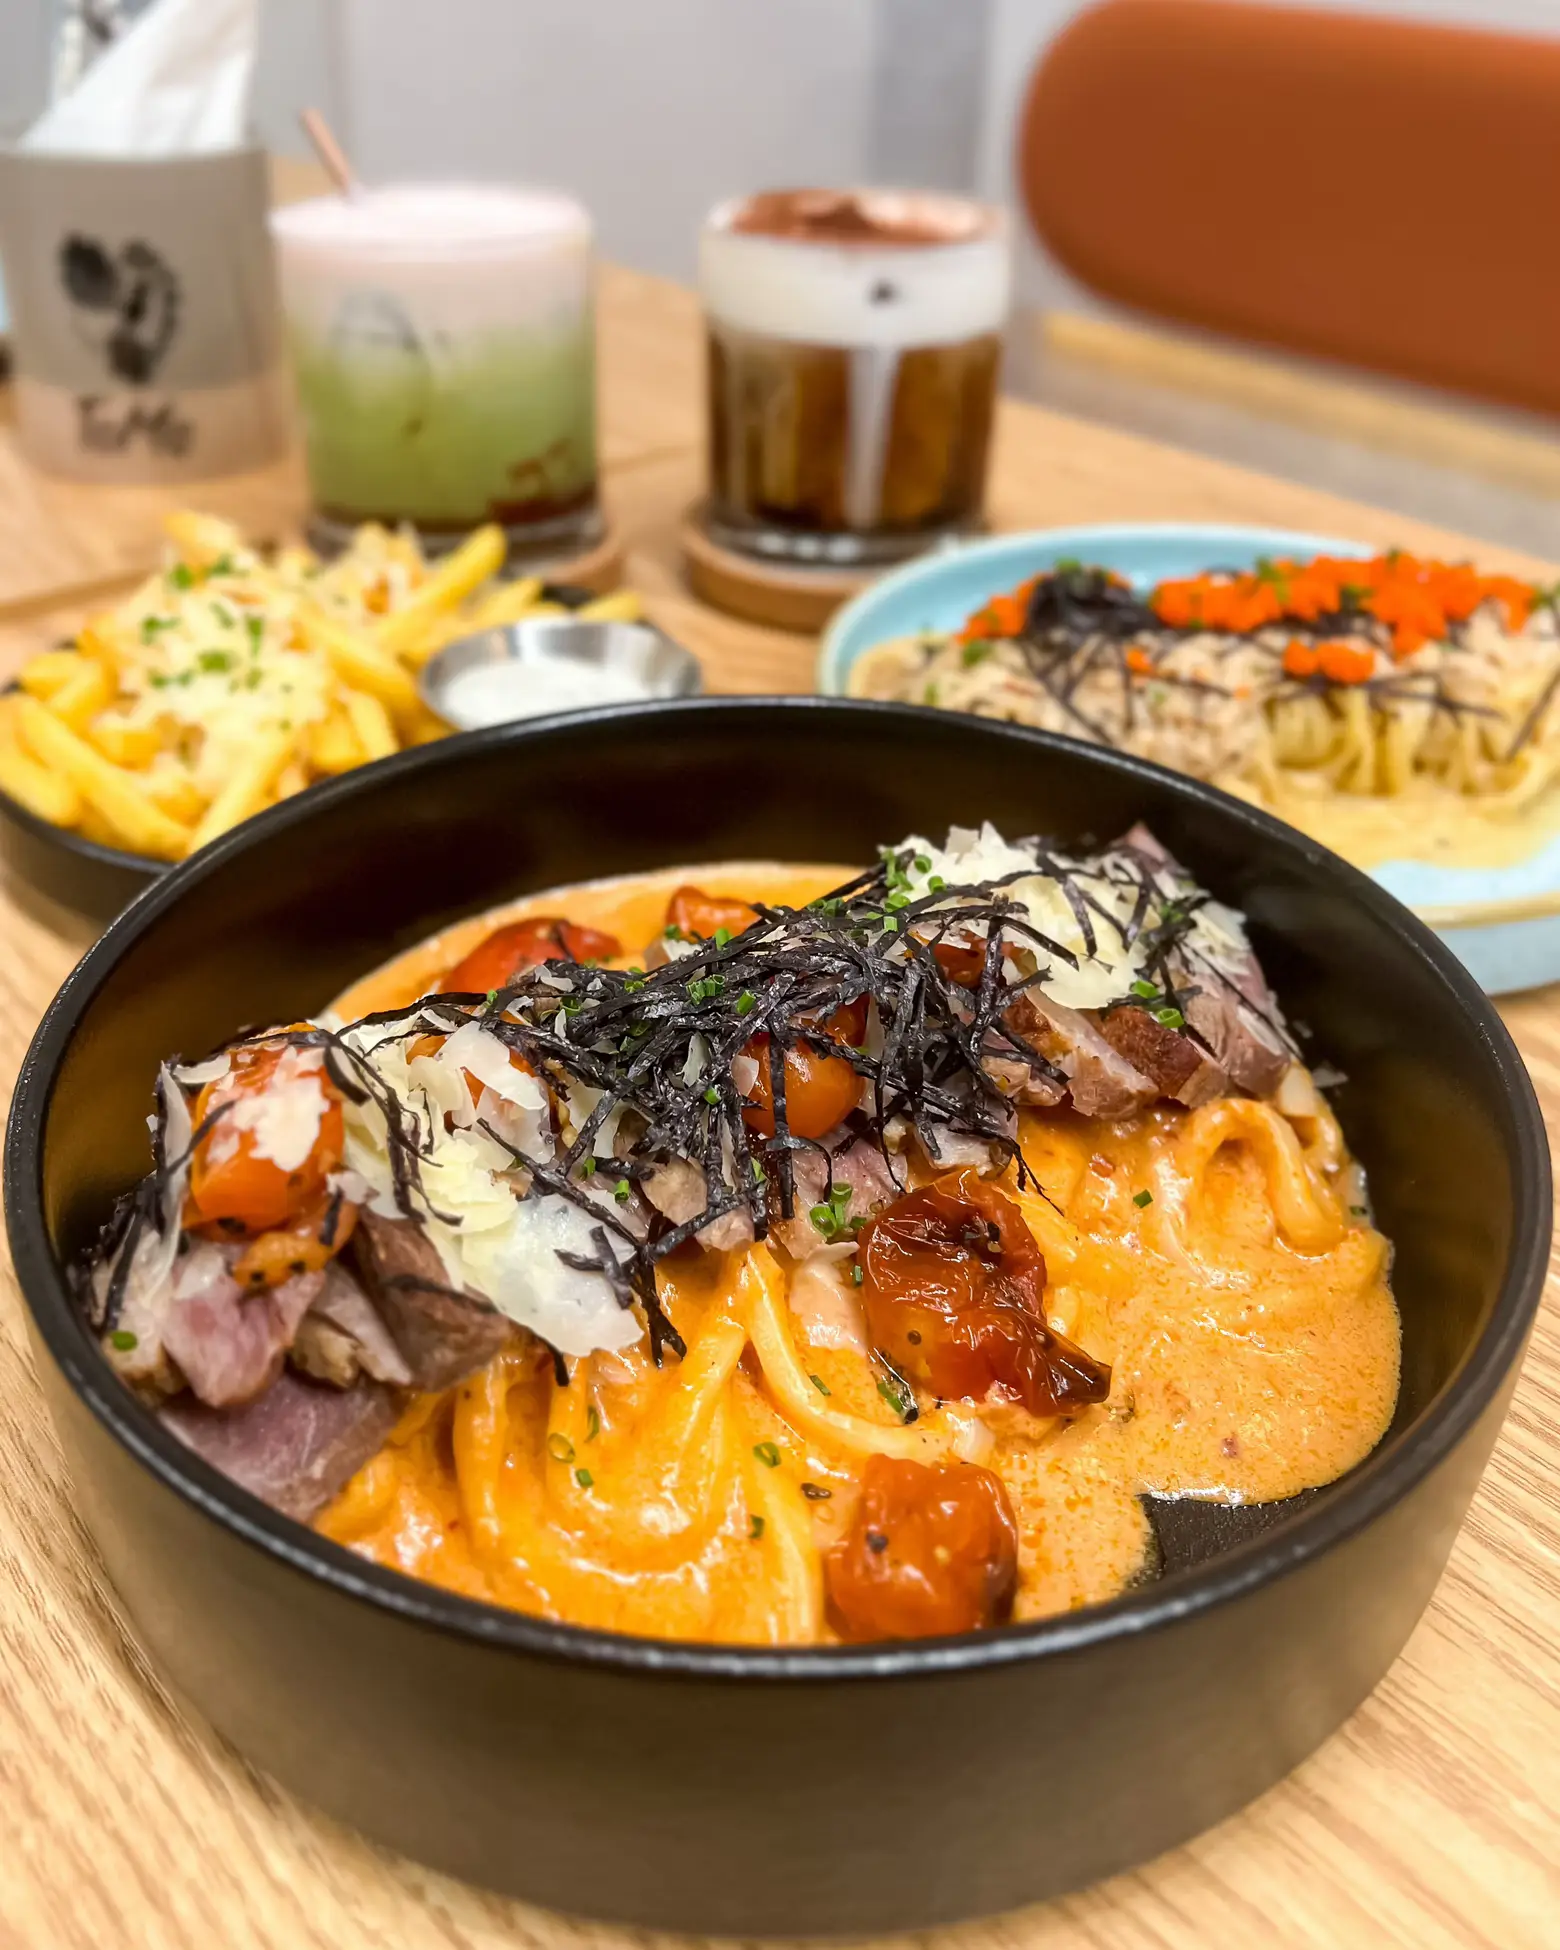 NEW cafe with the best food🤤🤤🤤💯's images(1)